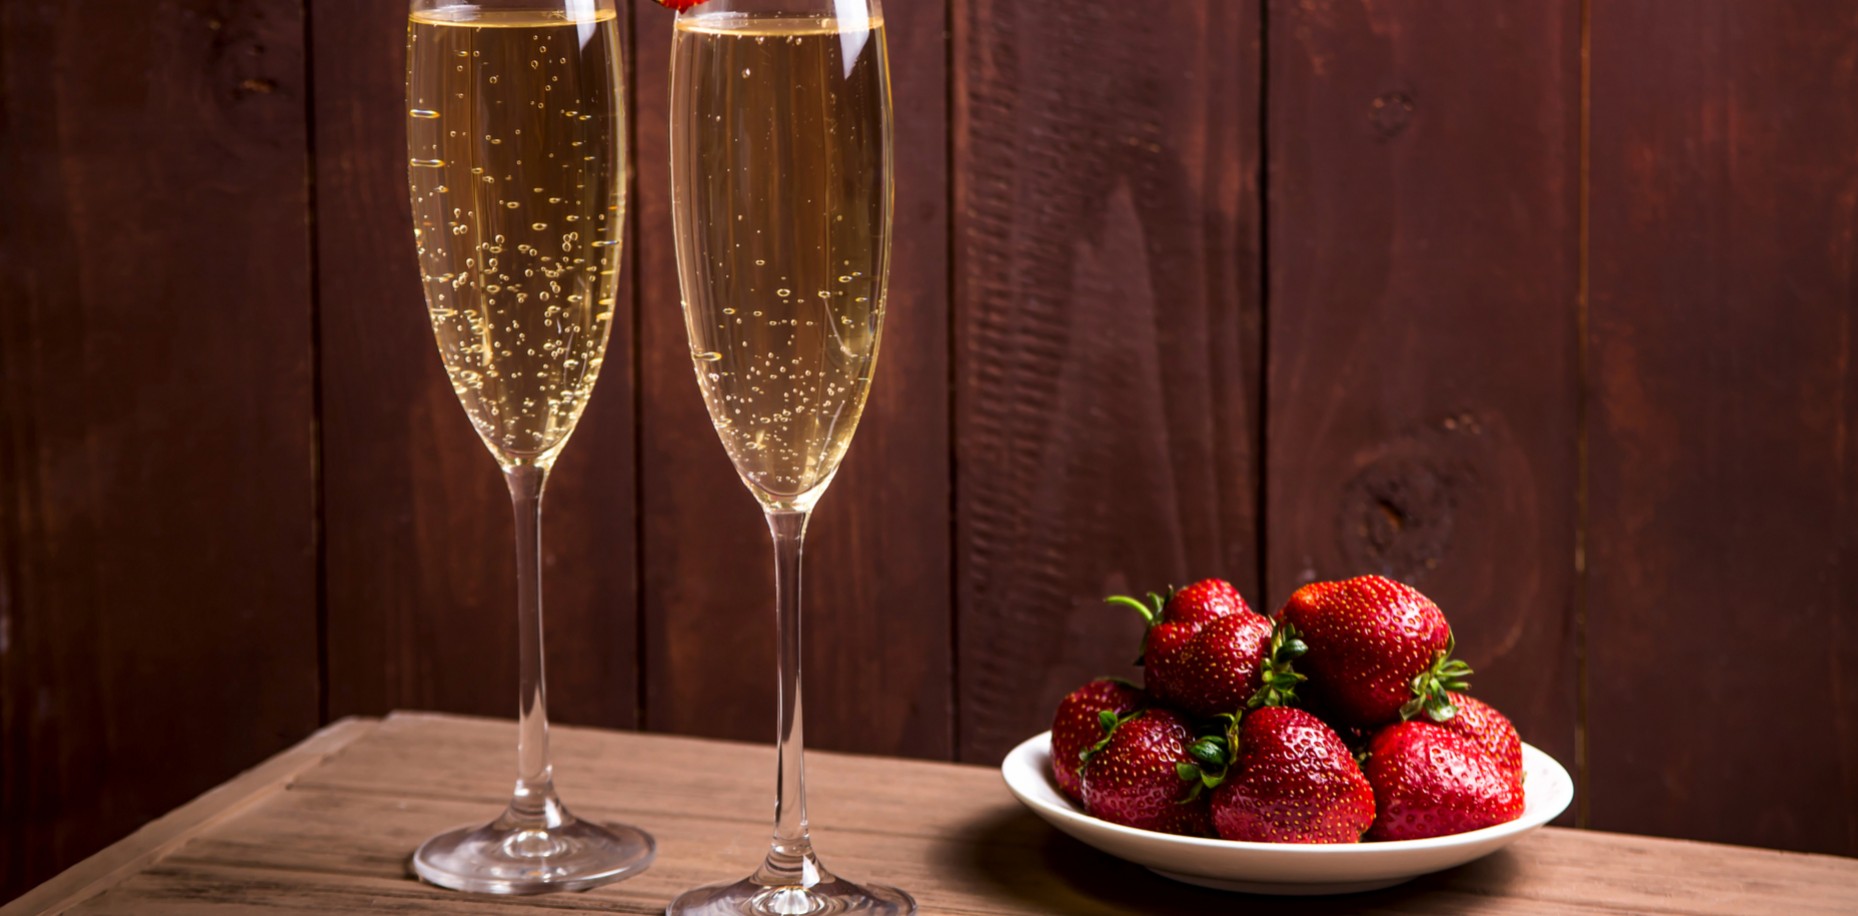 Visit Evabourne this weekend 12th & 13th Sept and take away a bottle of Prosecco and some delicious Strawberries.